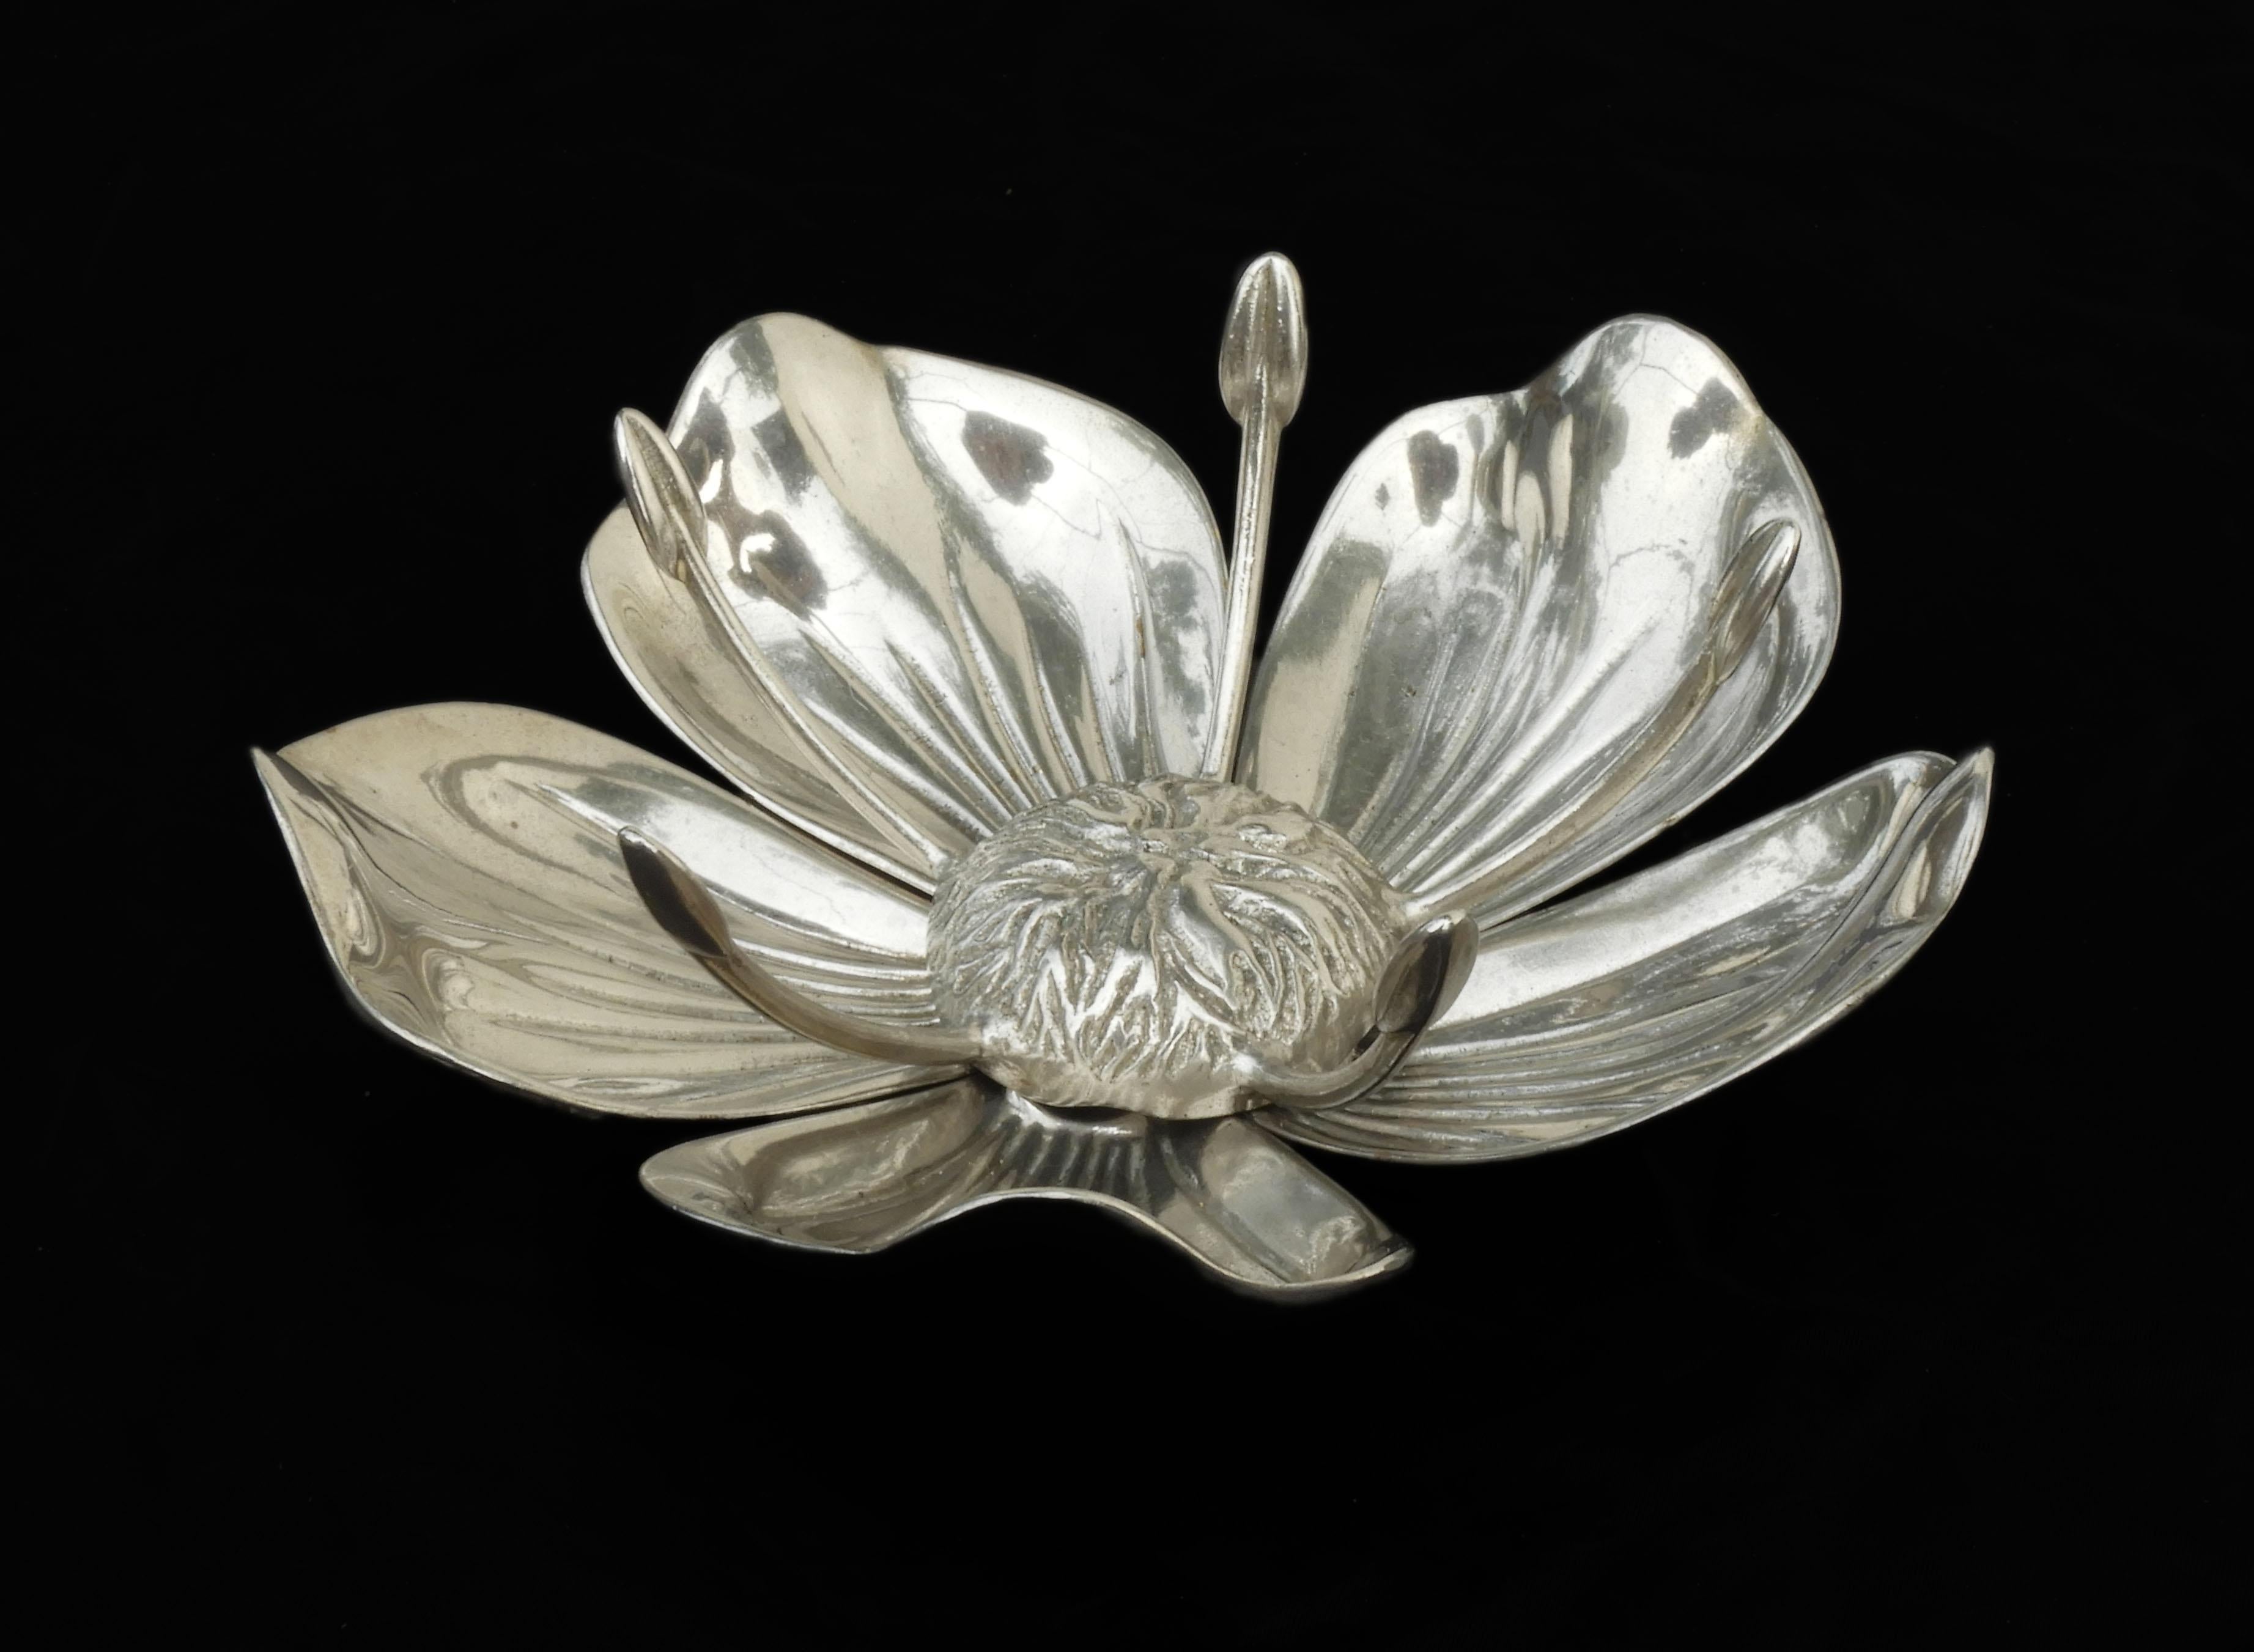 Hollywood Regency Mid Century Five Petal Flower Ashtray or Catch-all C1960s Italy